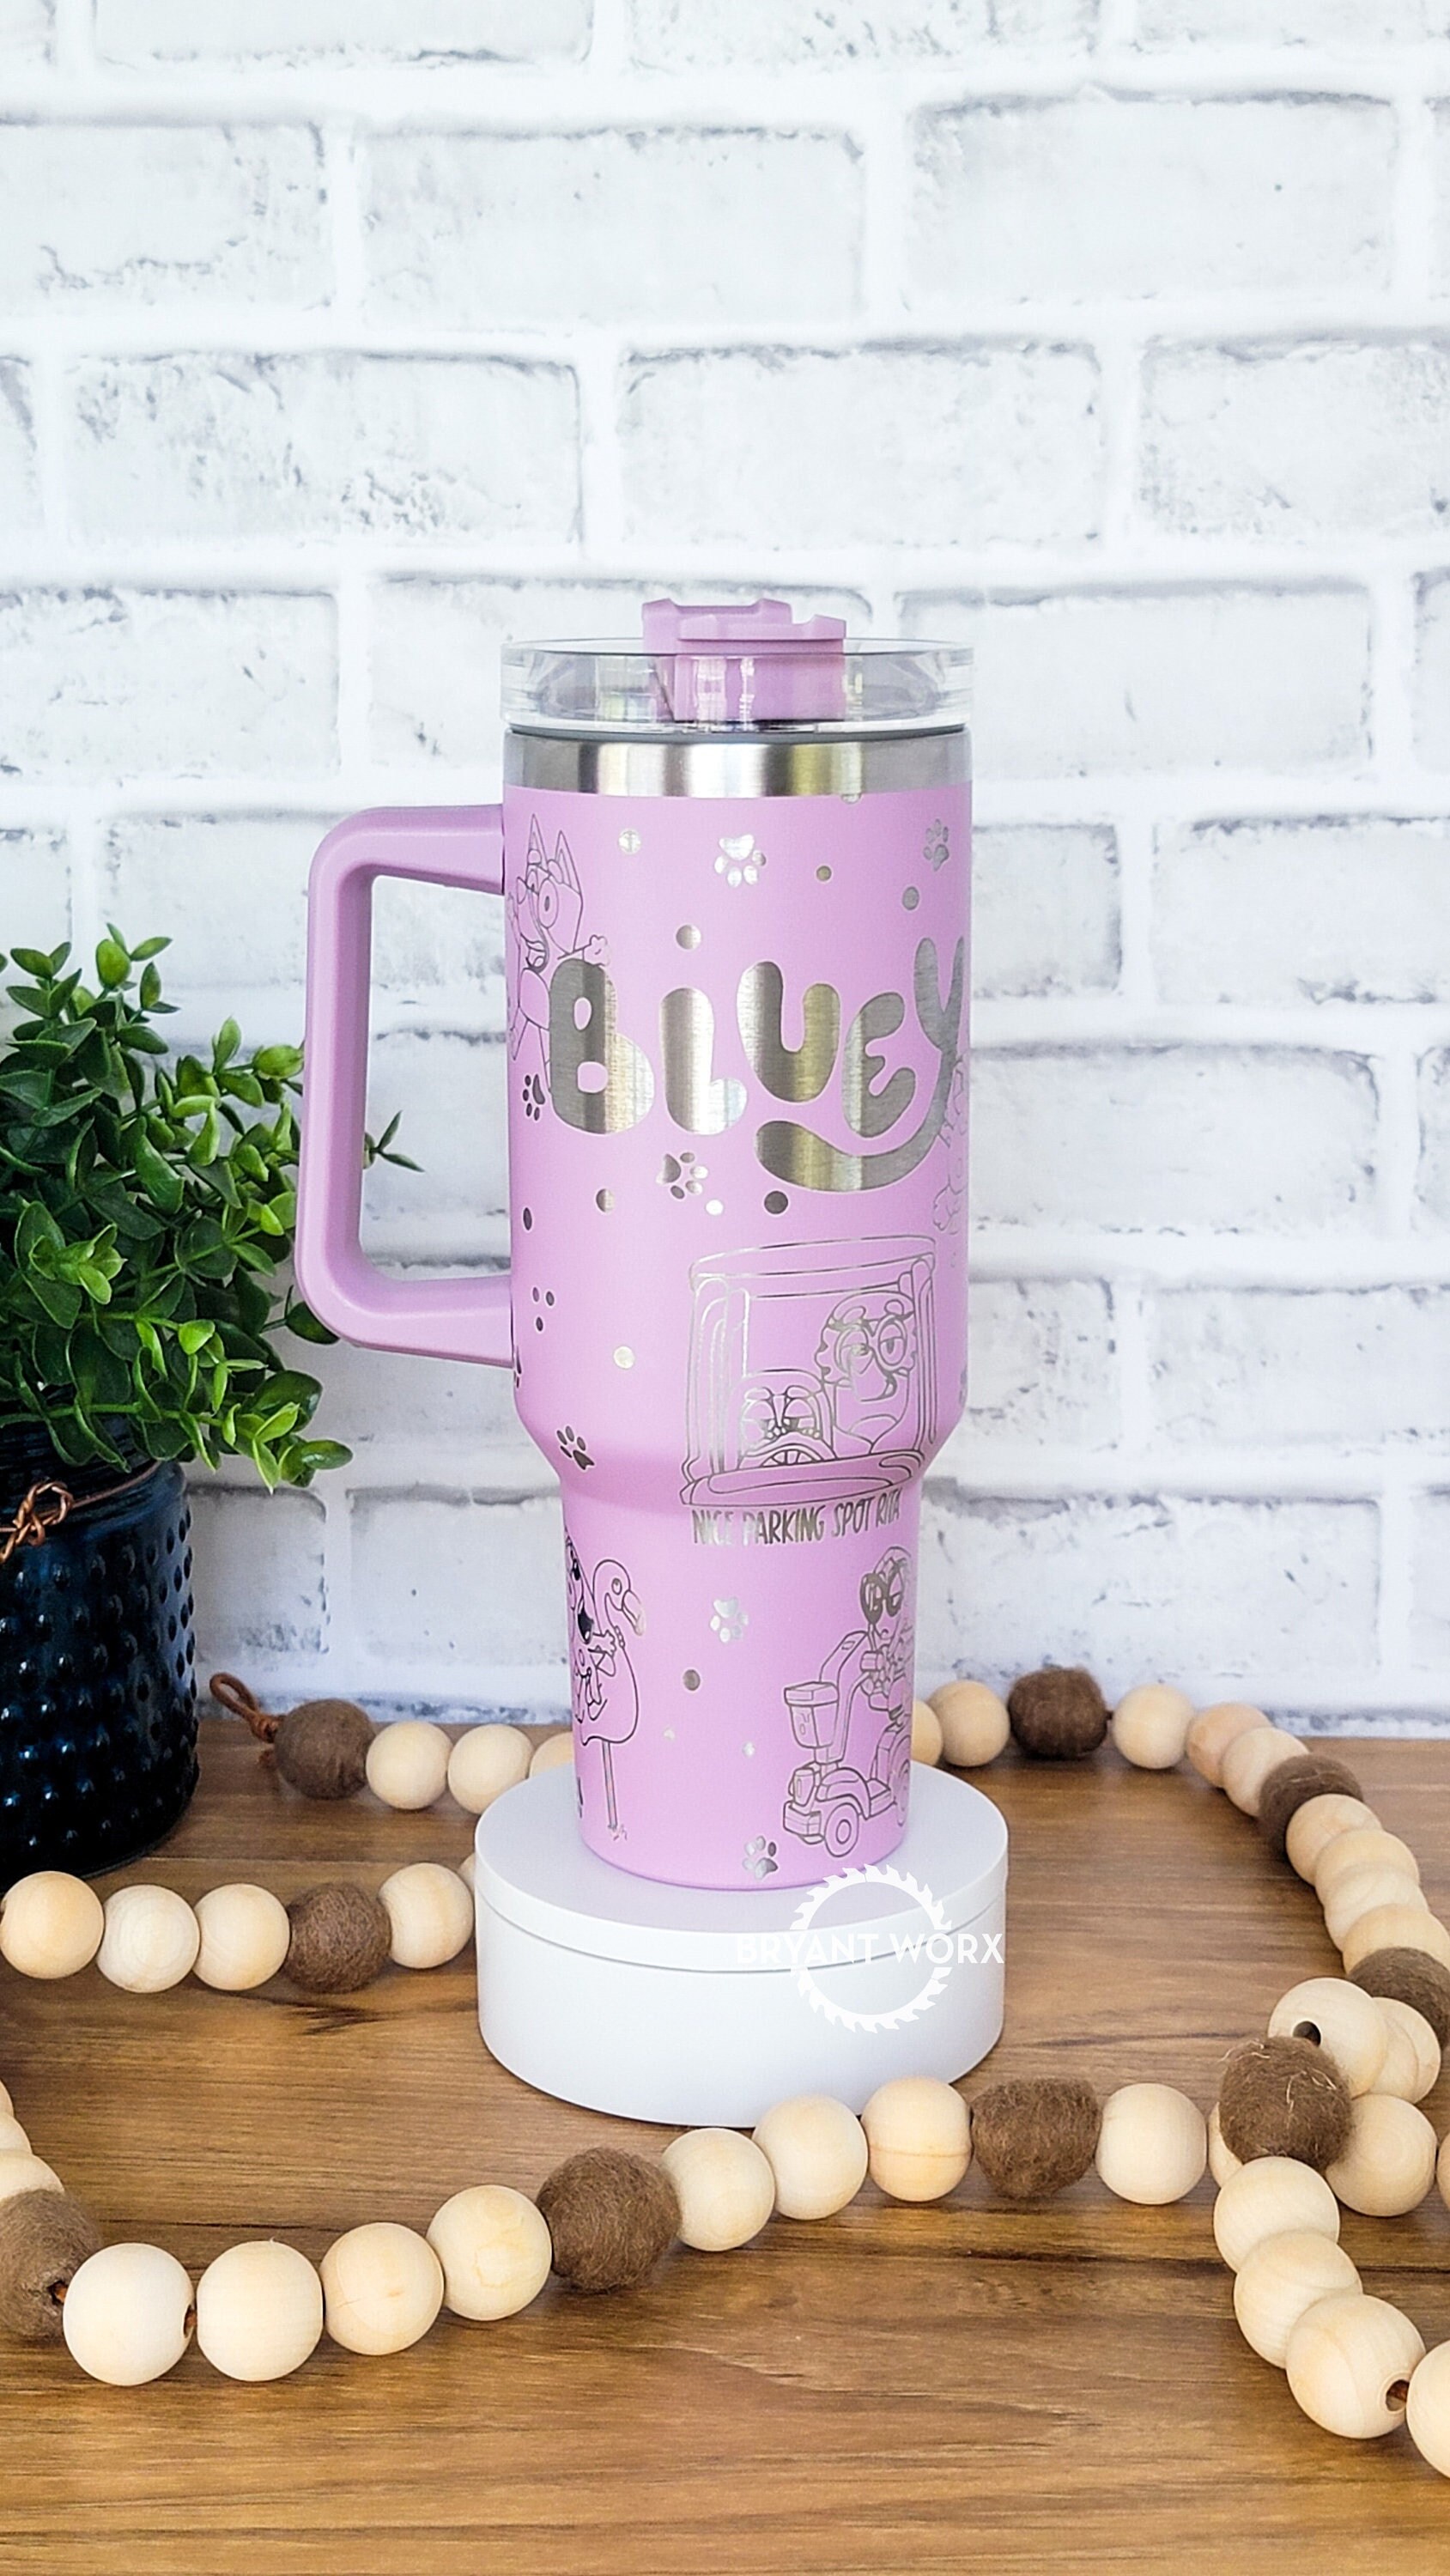 Bluey Stanley Cup Youre Doing Great Its Dad Bluey Family Stainless Steel  Tumbler Bandit Heeler Gift For Dad Mom Mum Bluey Bingo Muffin - Laughinks